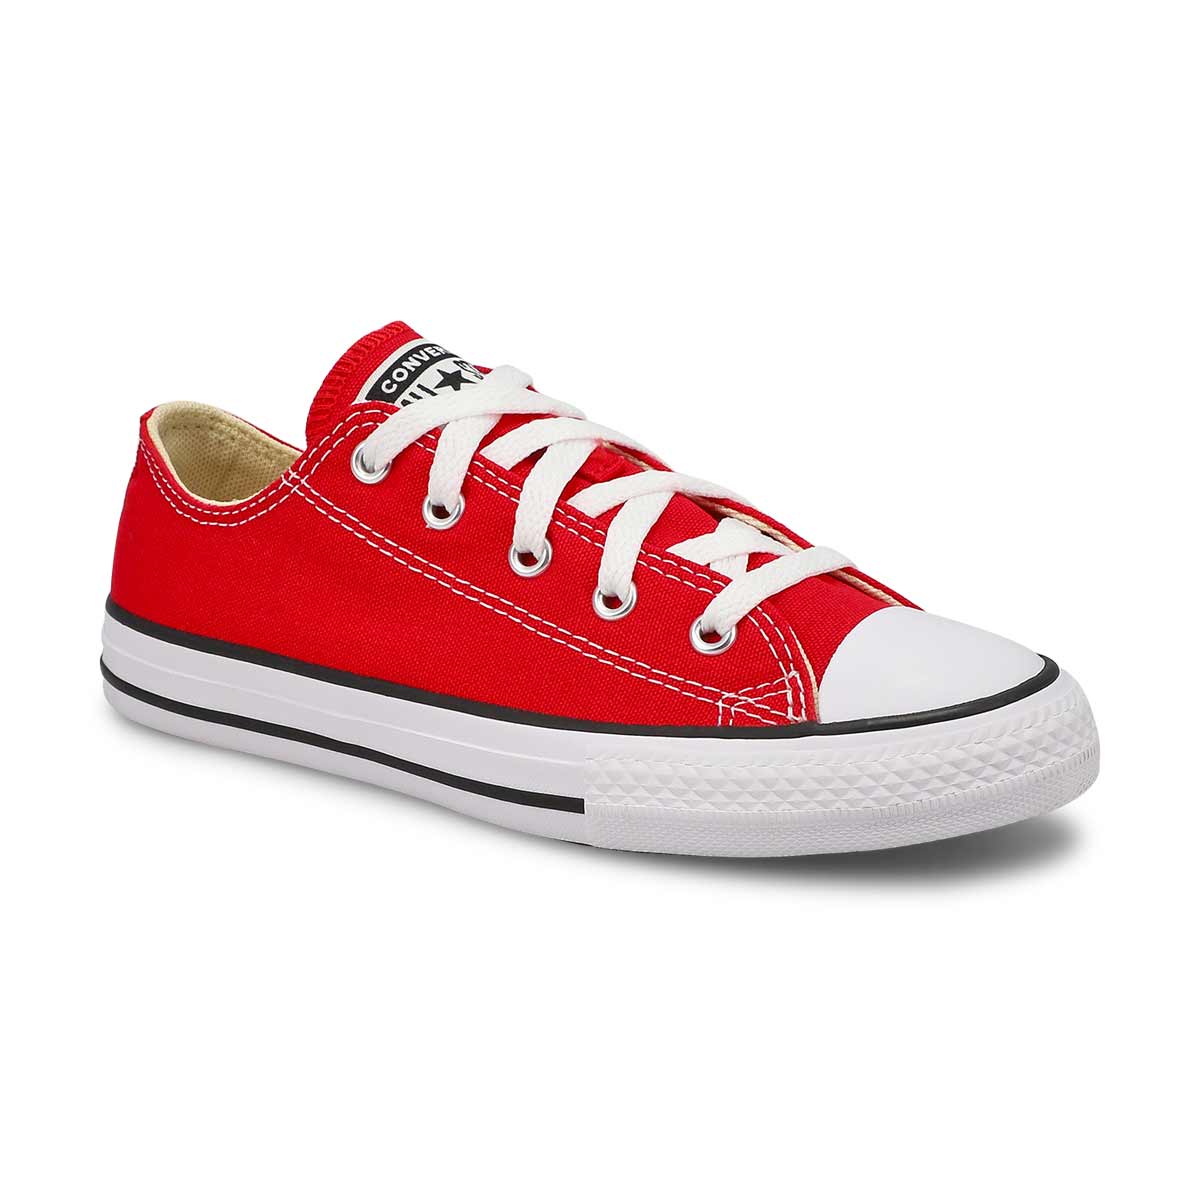 Kids' Chuck Taylor All Star Sneaker - Red